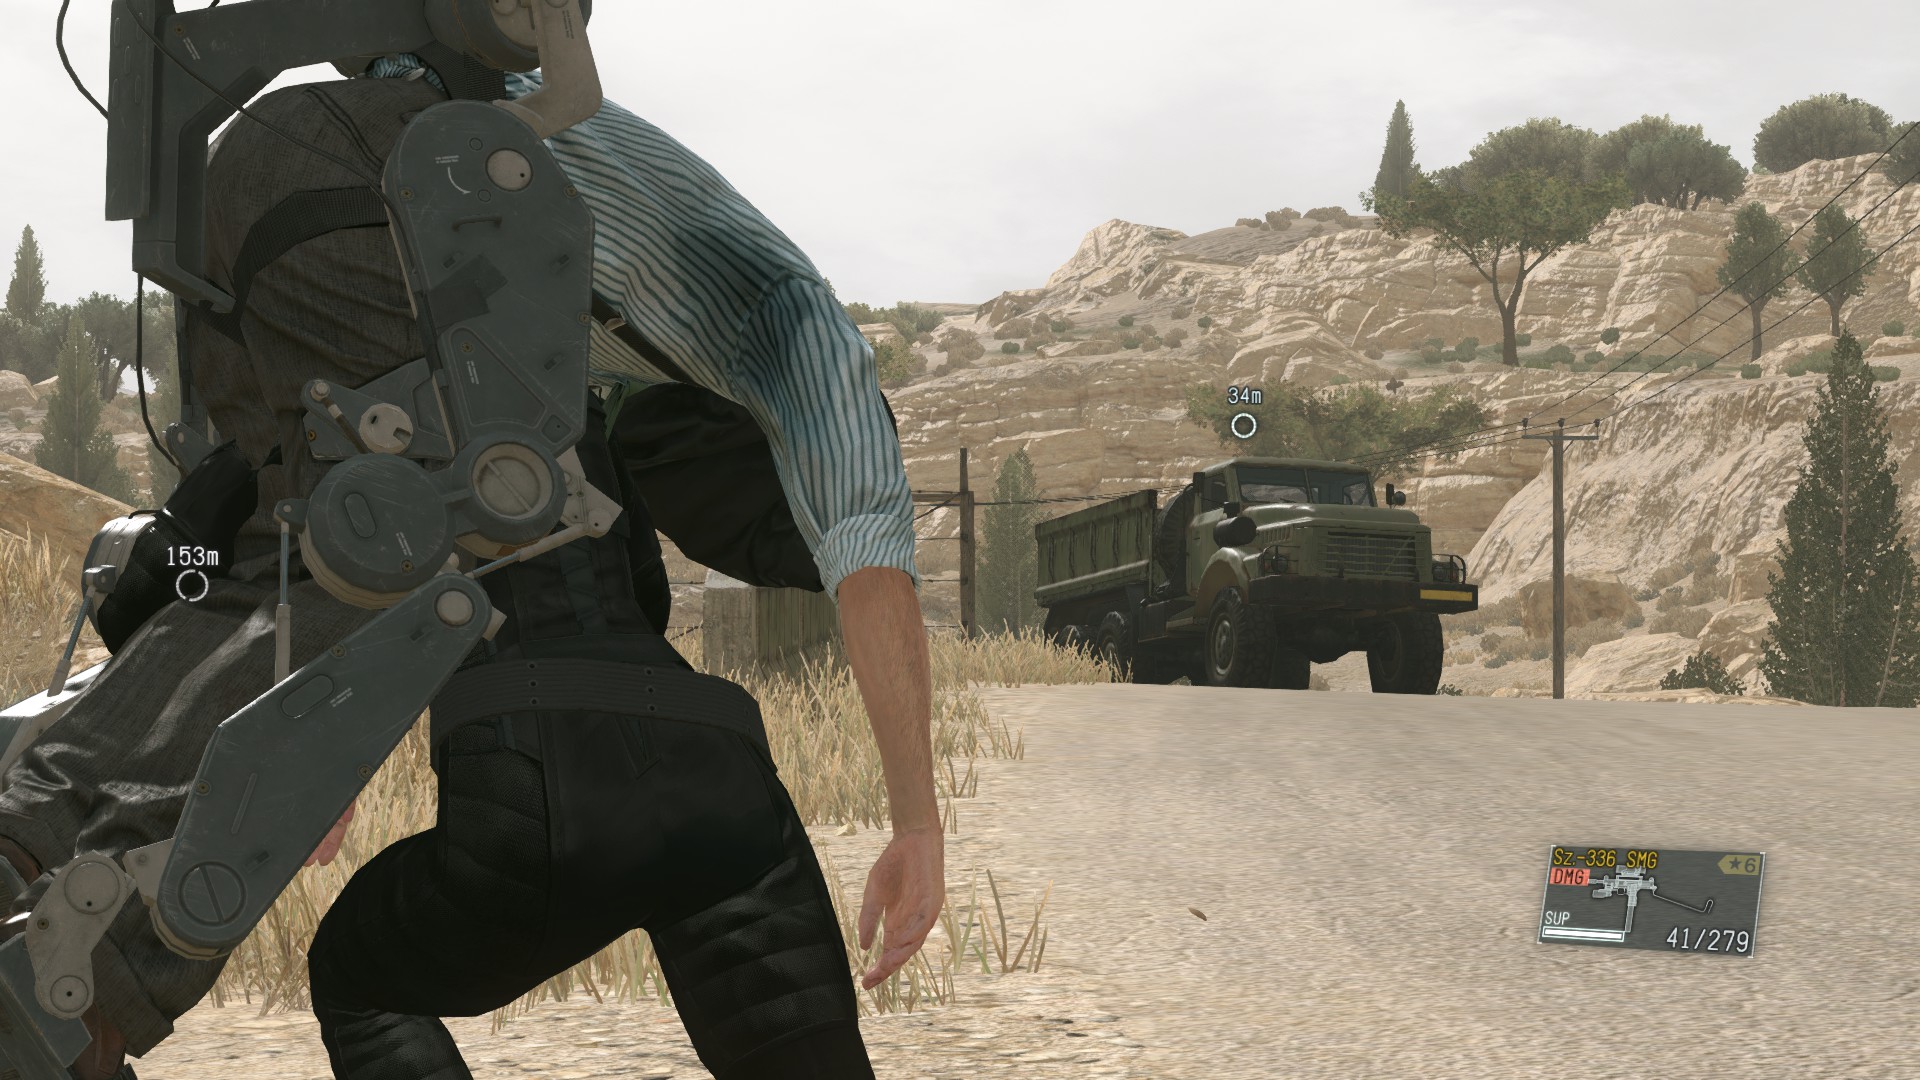 METAL GEAR SOLID V: THE PHANTOM PAIN - All Vehicles and Missions Guide - Hellbound - 72DEC6C